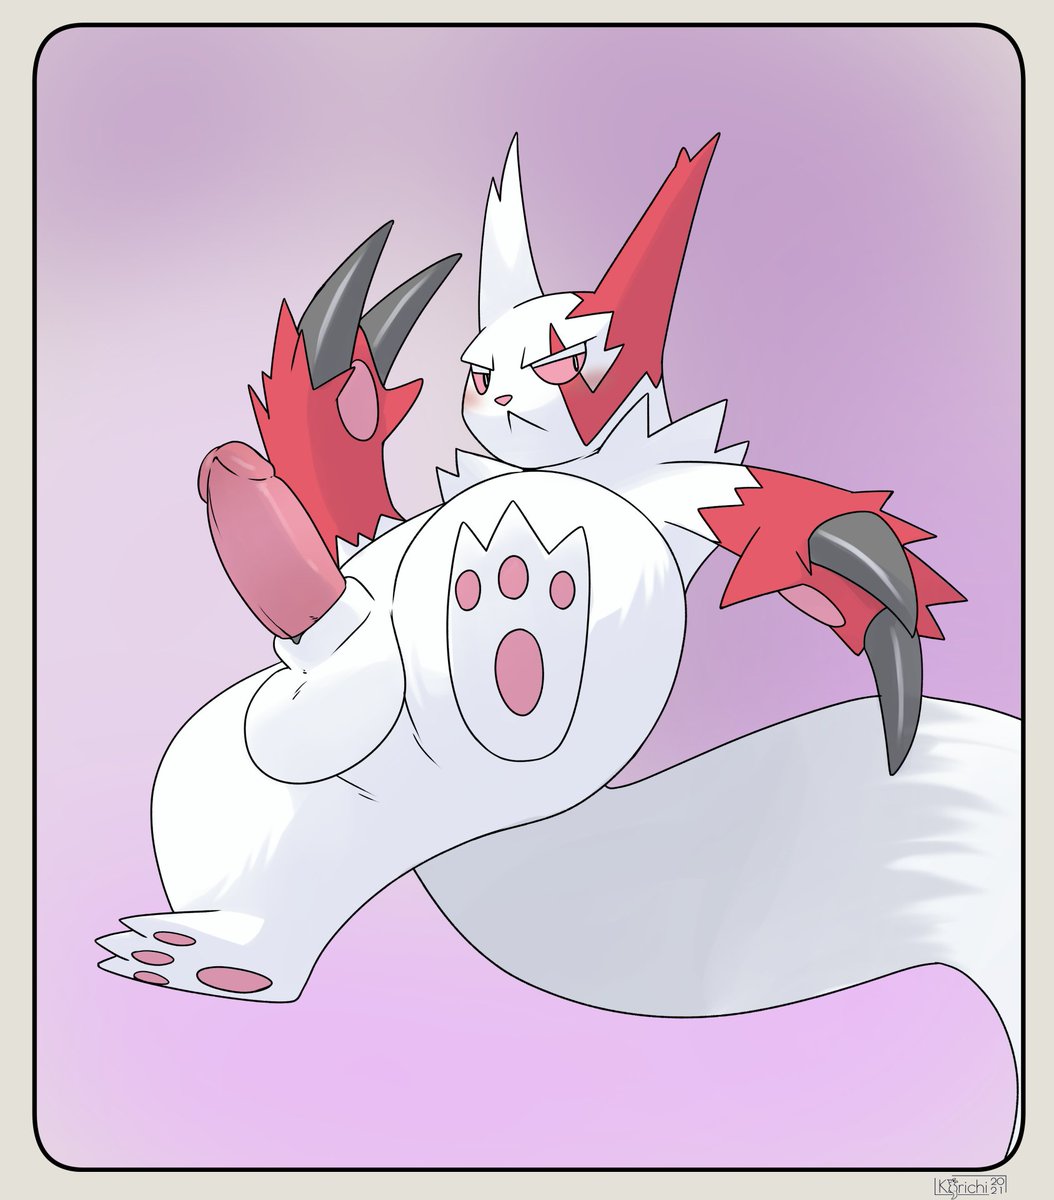 Starting it off with Zangoose! 